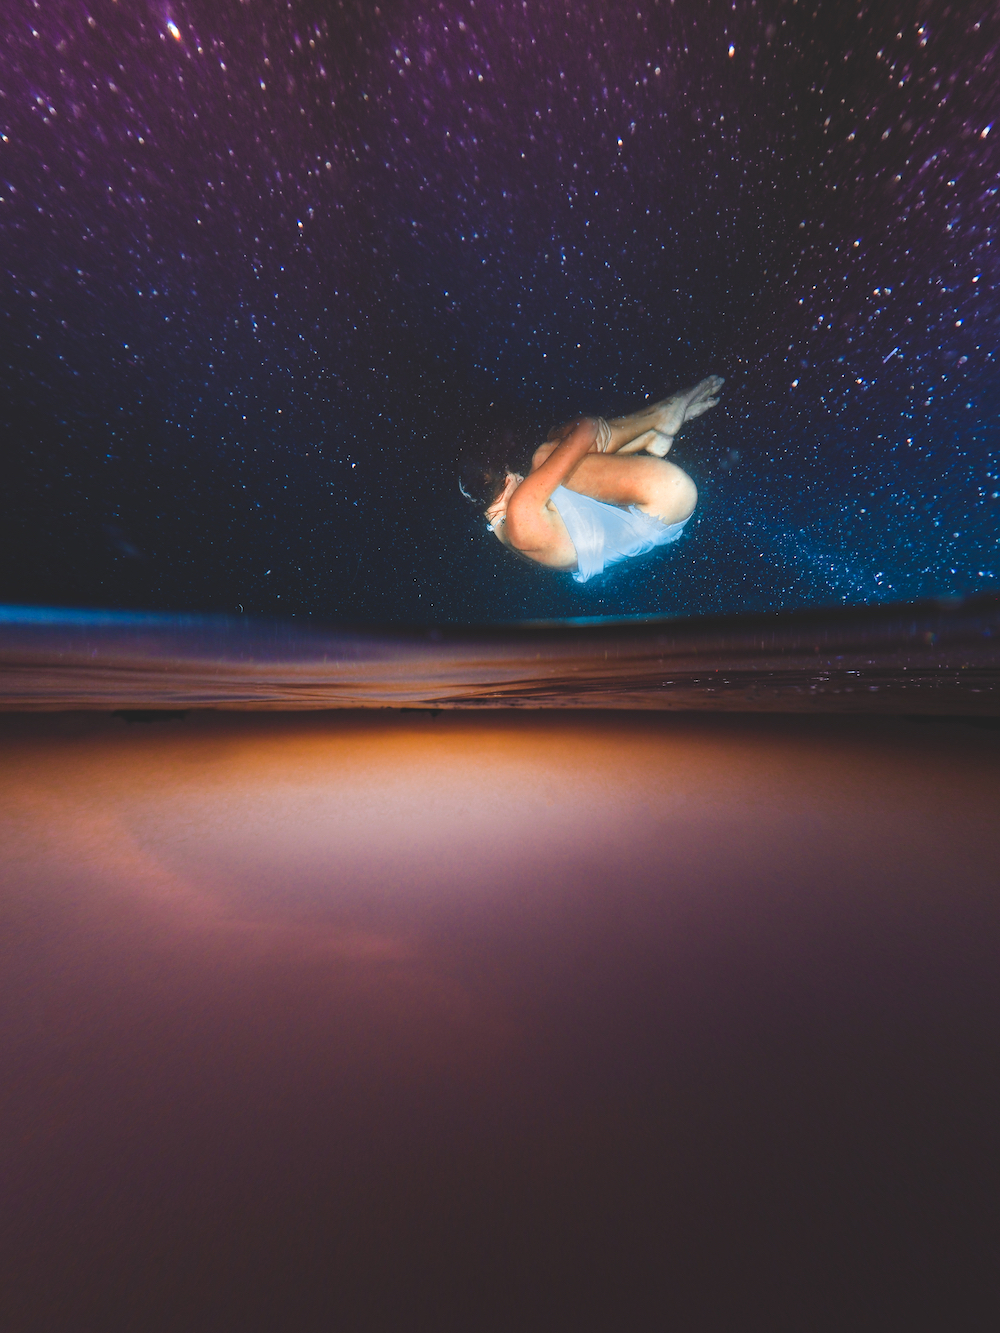 This image, titled 'Supernova in Paradise', won the Up & Coming category of the Underwater Photographer of the Year 2022 competition. Image: © Francisco 'Quico' Abadal Ramon/UPY2022